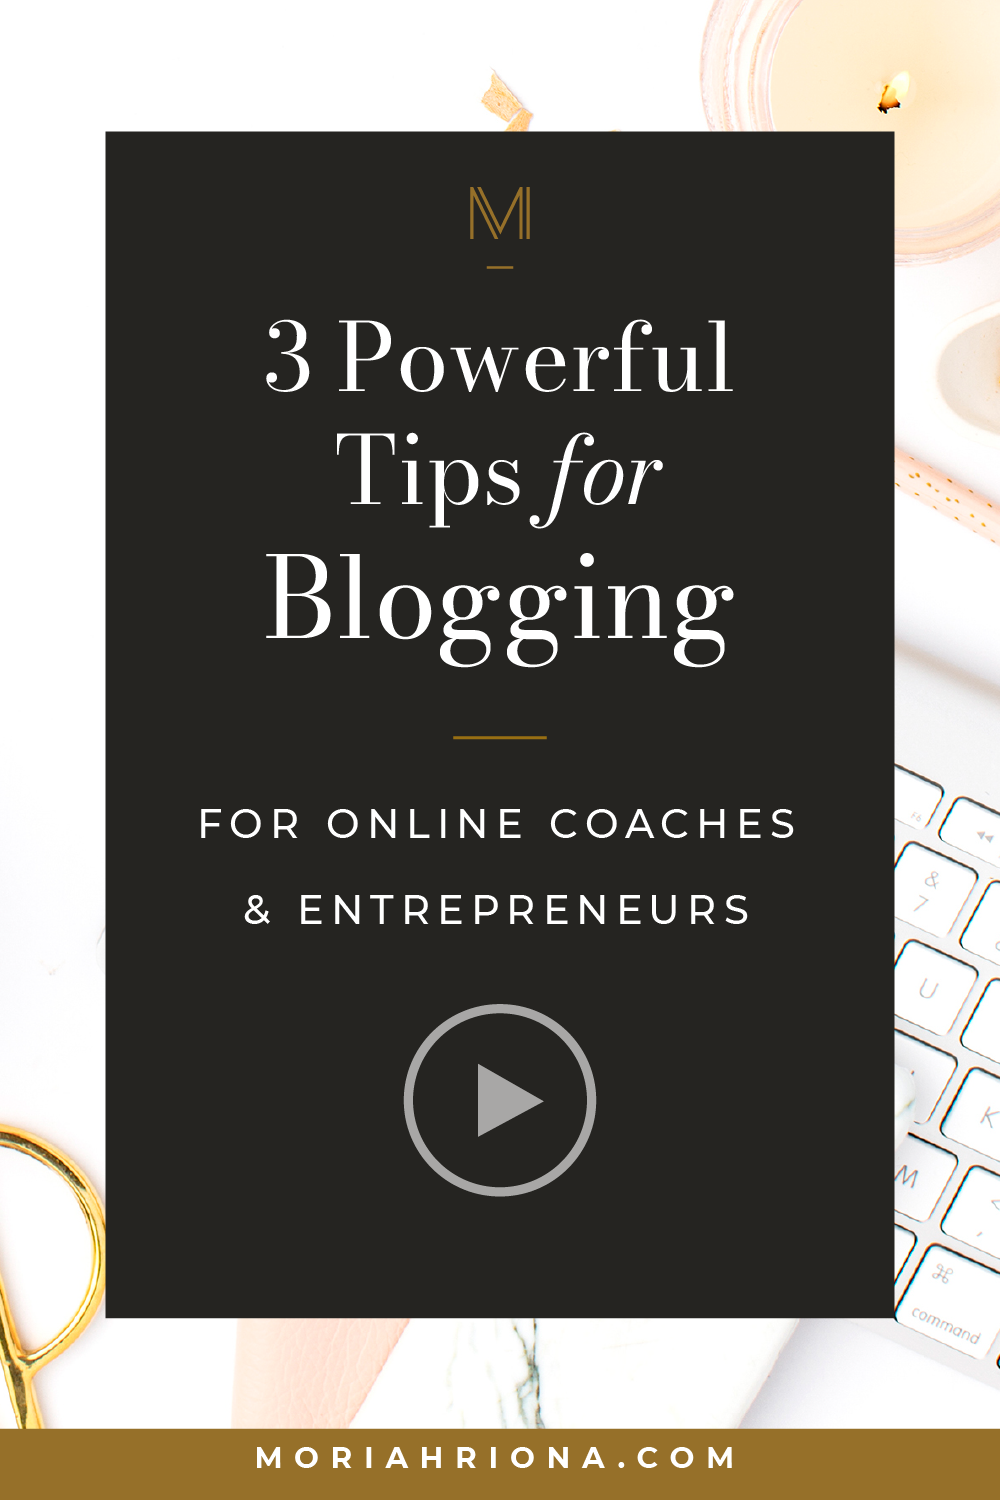 Are you wondering how you can use your blog to reach more dream clients? This blog post is for you! I’m sharing my best blogging advice so you can learn how to use this powerful marketing tool to expand your reach and make more money. It’s all here in my top 3 tips for blogging! #blogging #bloggingtips #blogger #contentmarketing